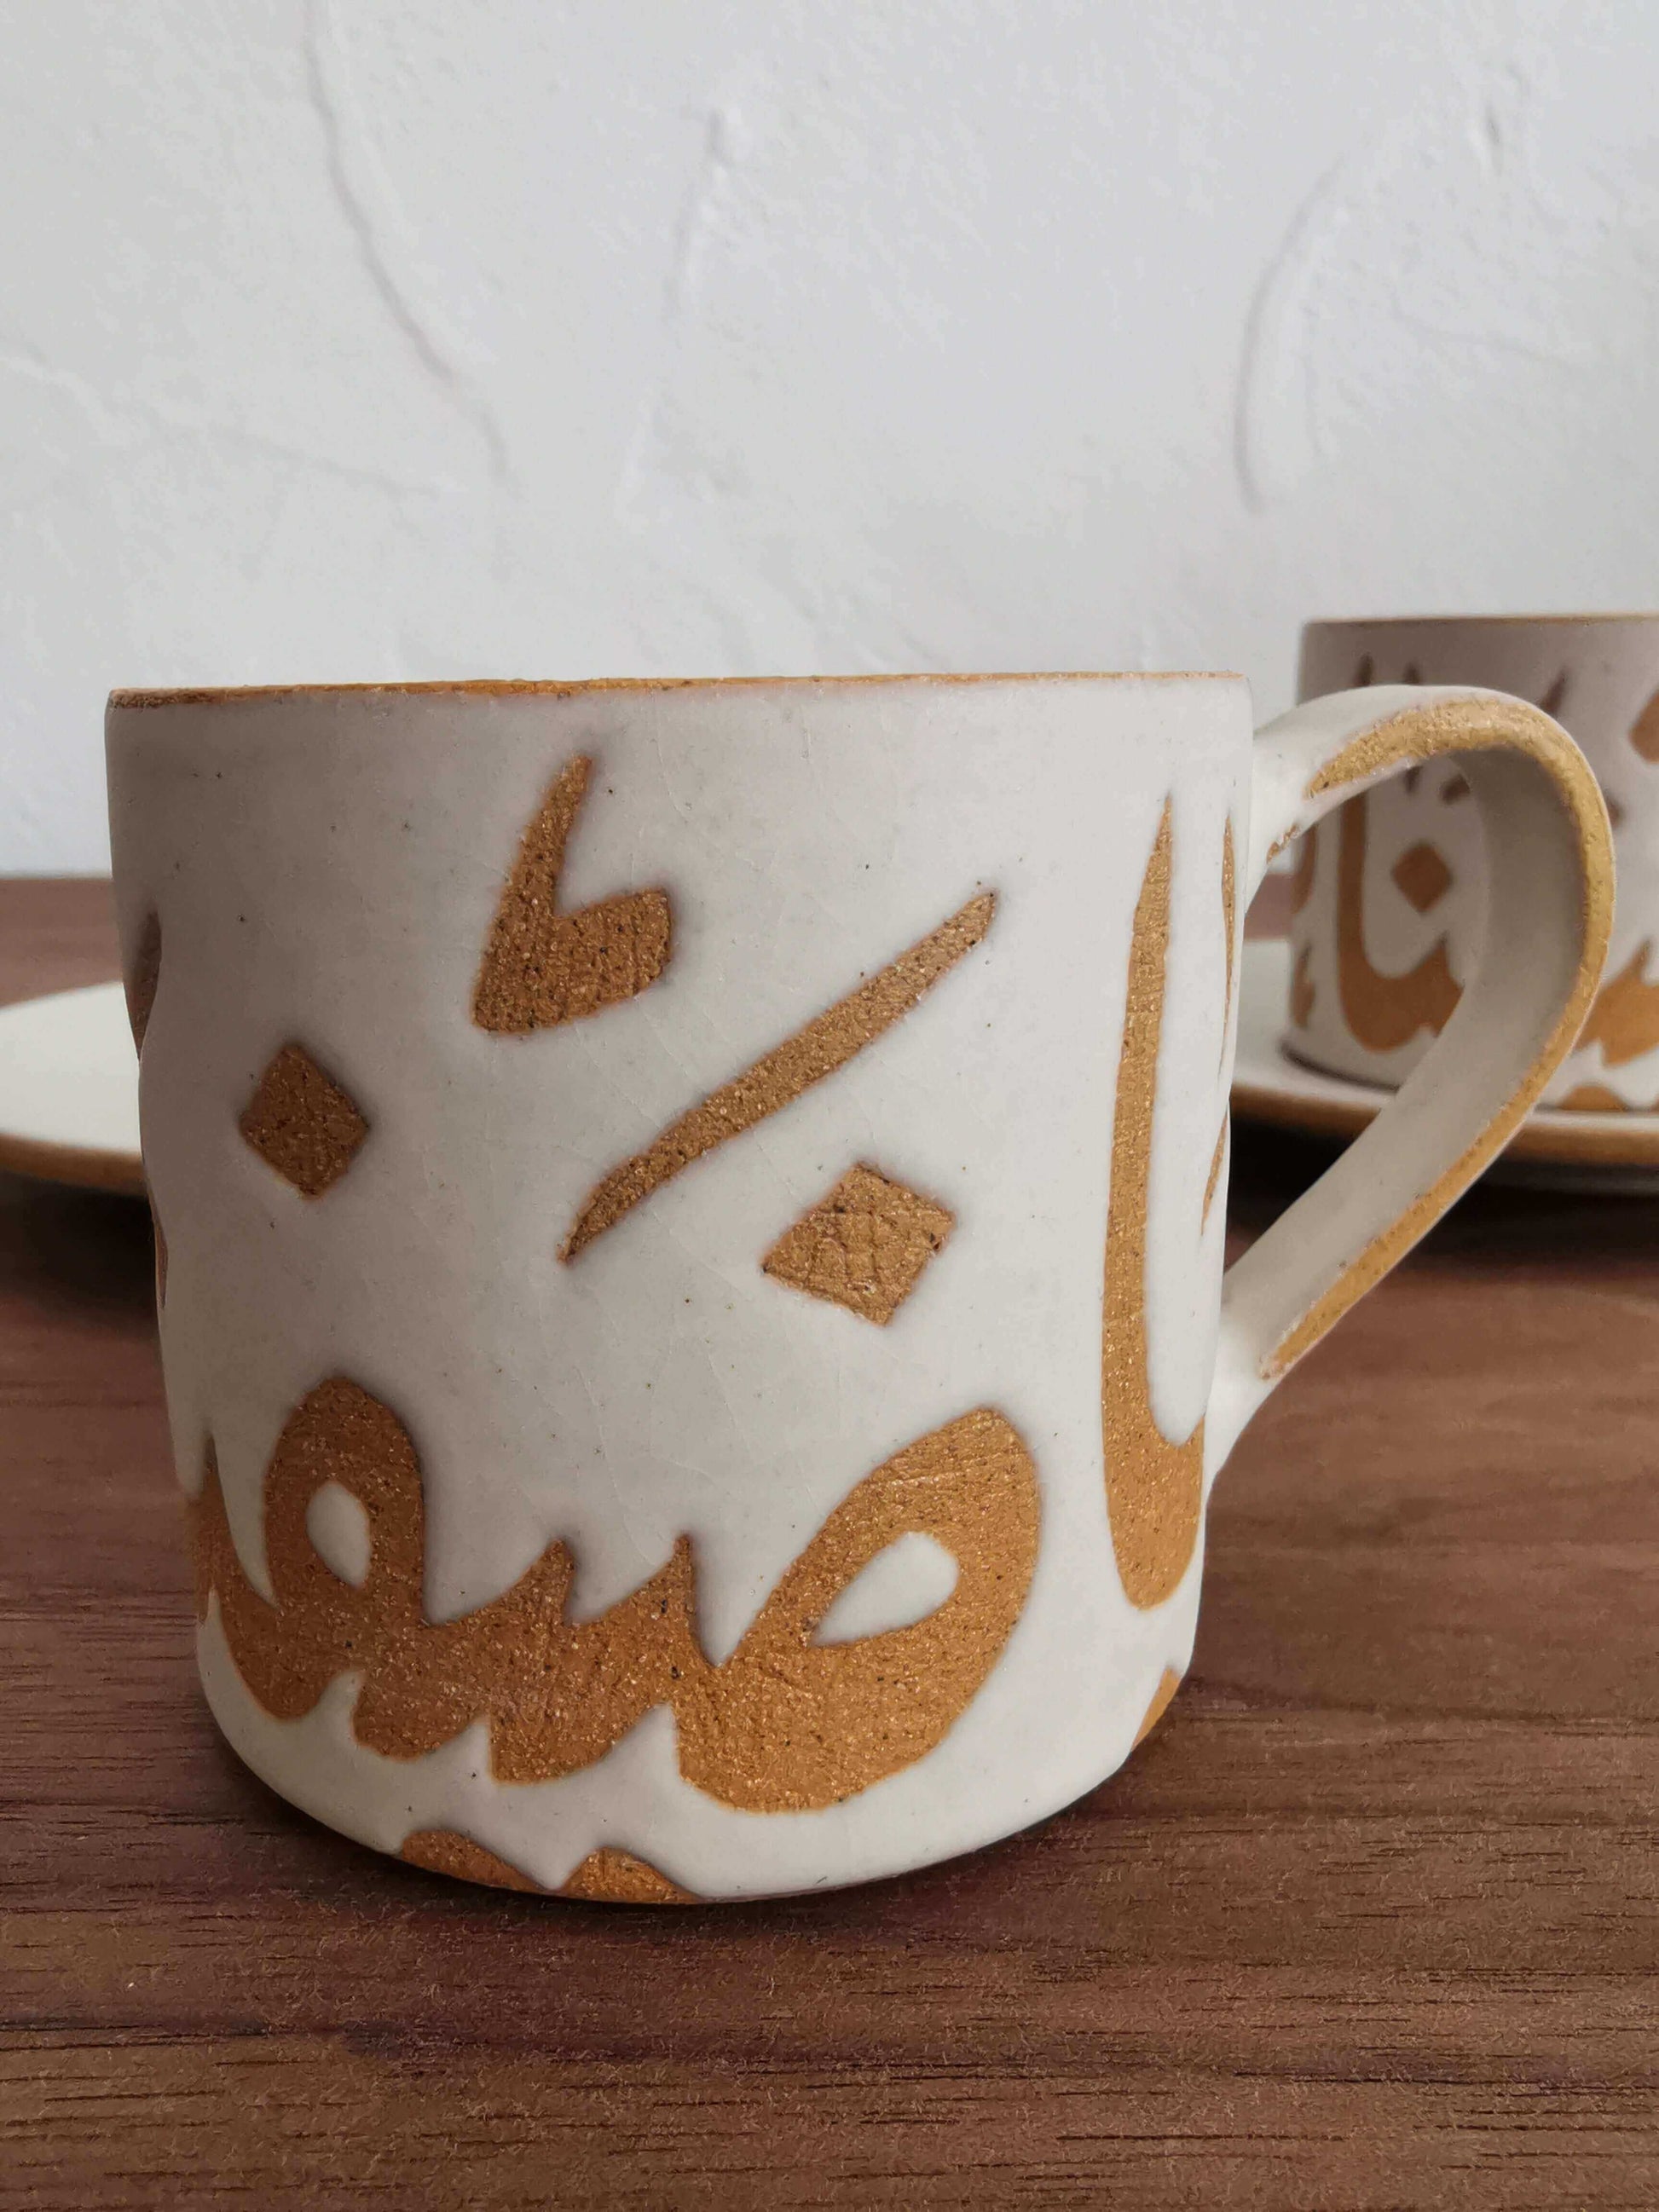 handmade pottery cup, pottery handmade, ceramic handmade pottery, Pottery dinnerware, handmade cup, Ramadan gift, mothers day gift, house warming gift, pottery cup medium, Arabic calligraphy art, handwritten calligraphy, handwritten Arabic calligraphy